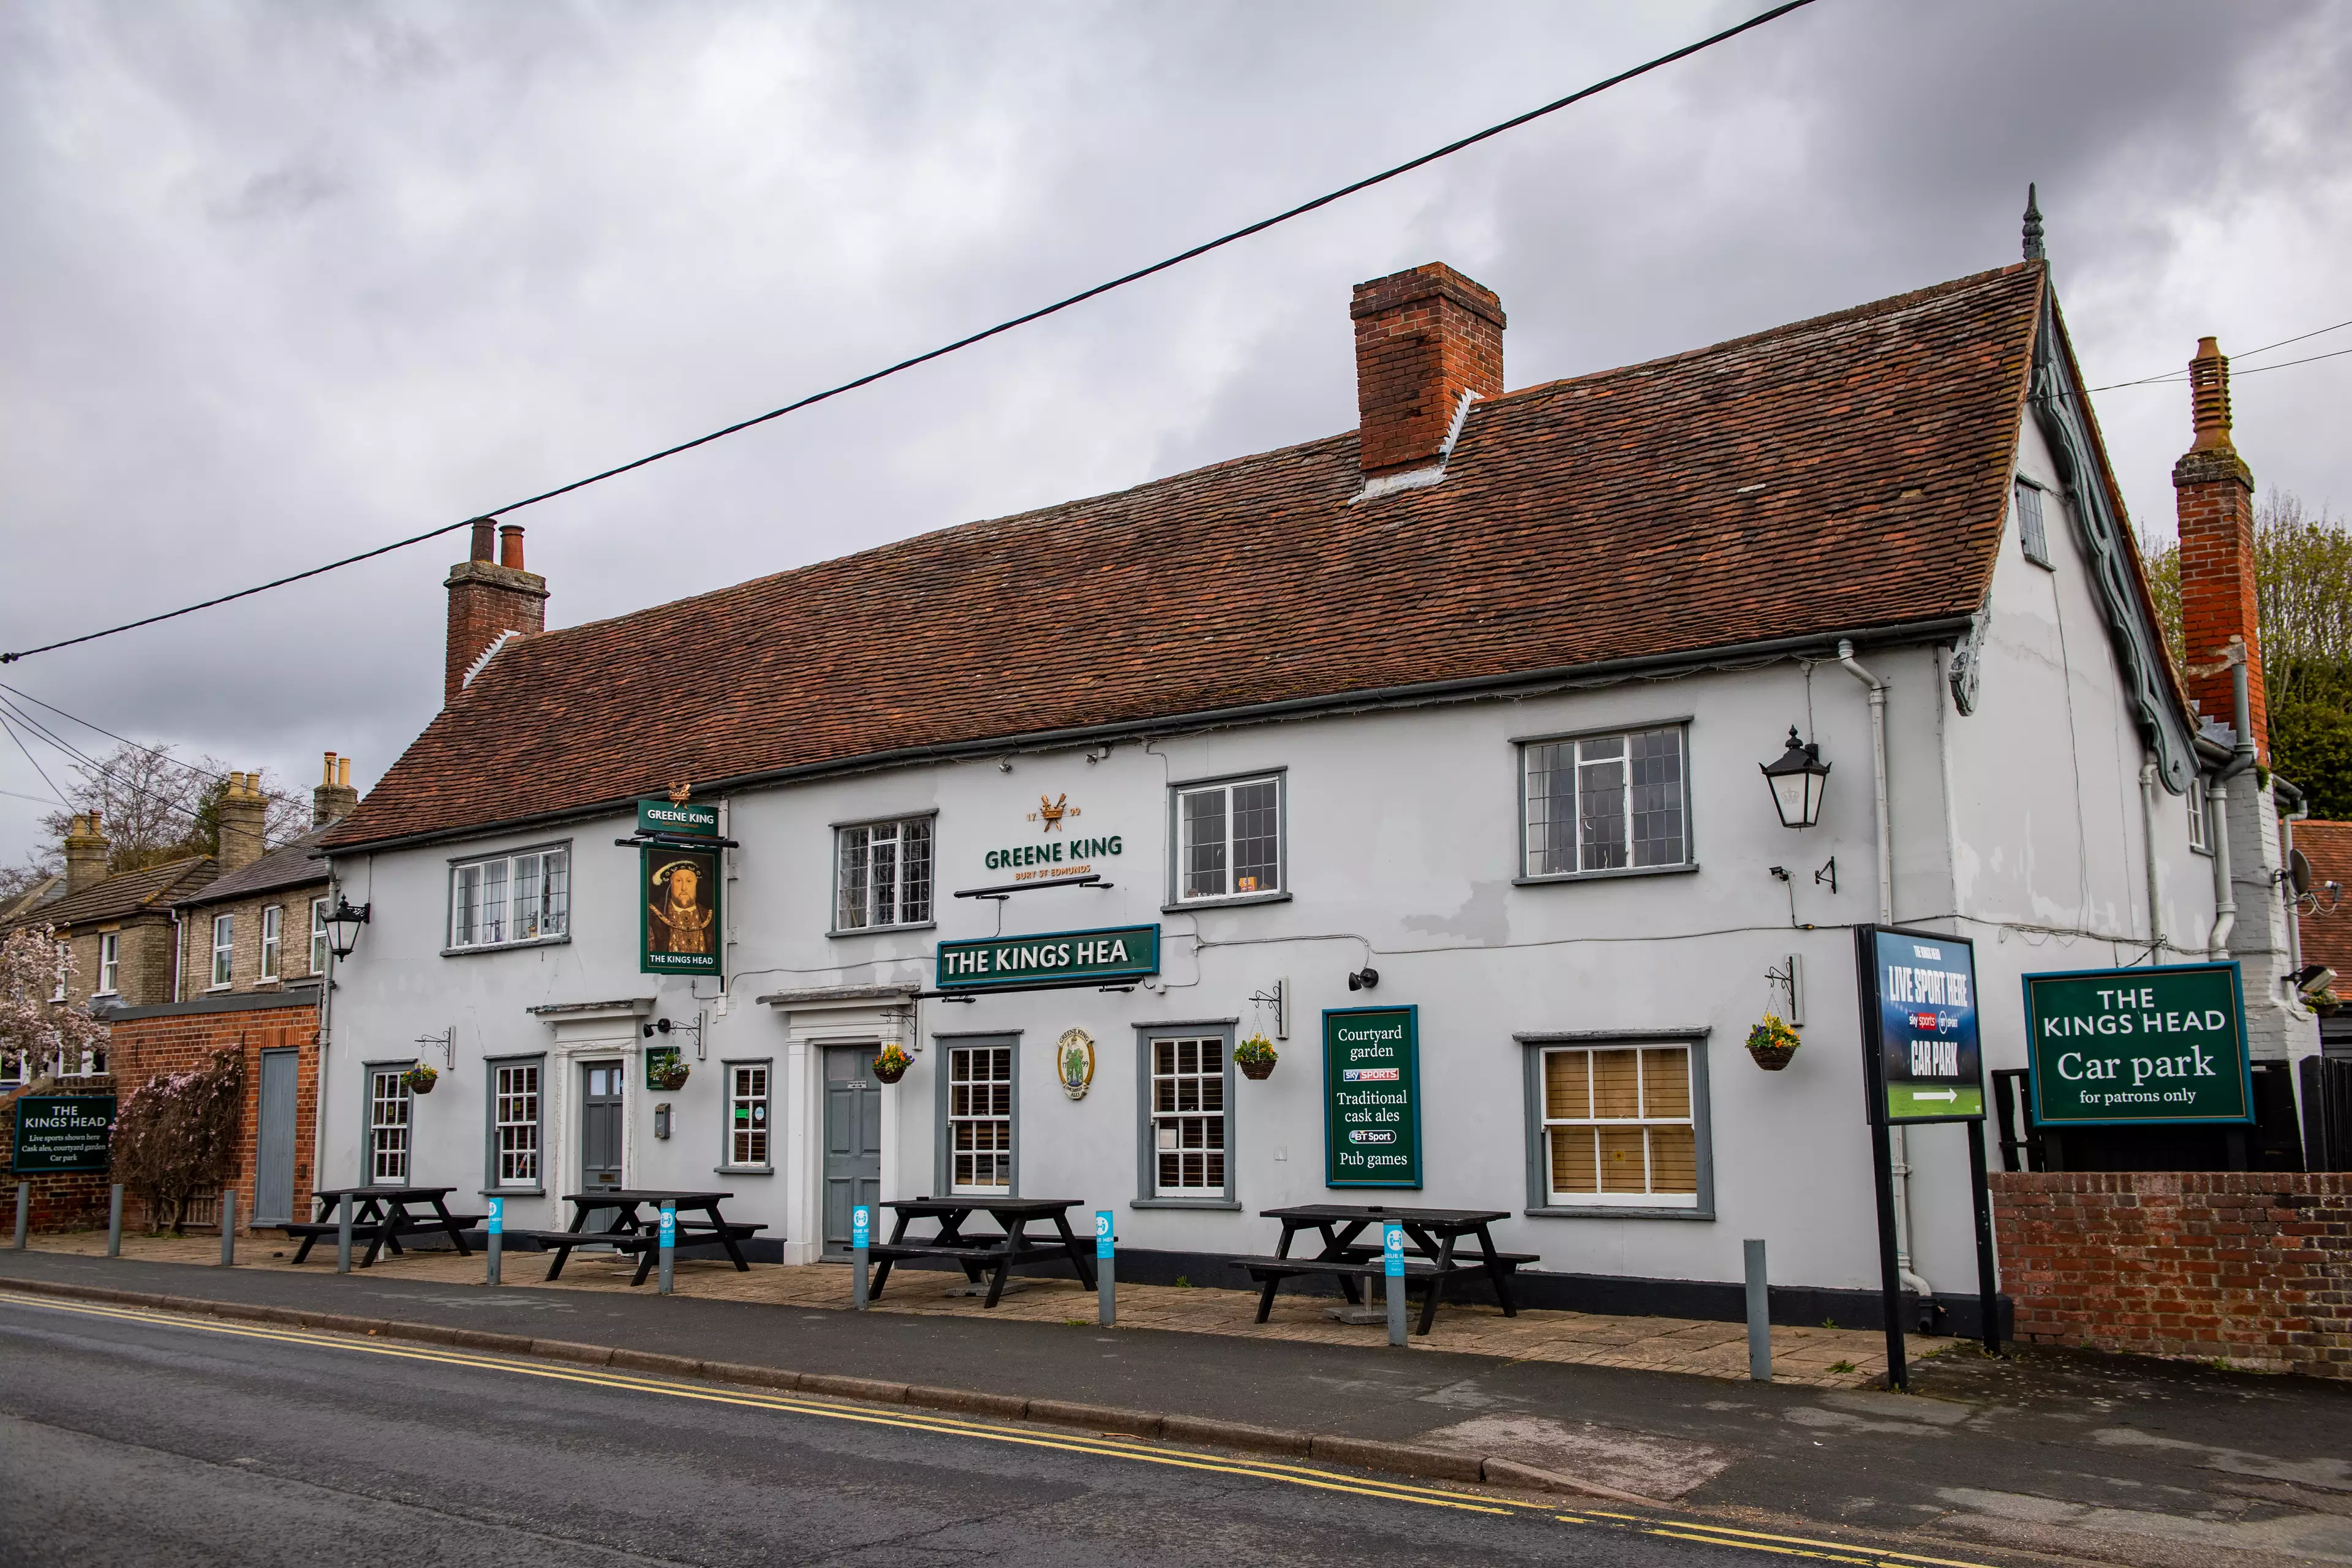 The incident happened at the Kings Head pub in Great Cornard, Suffolk.